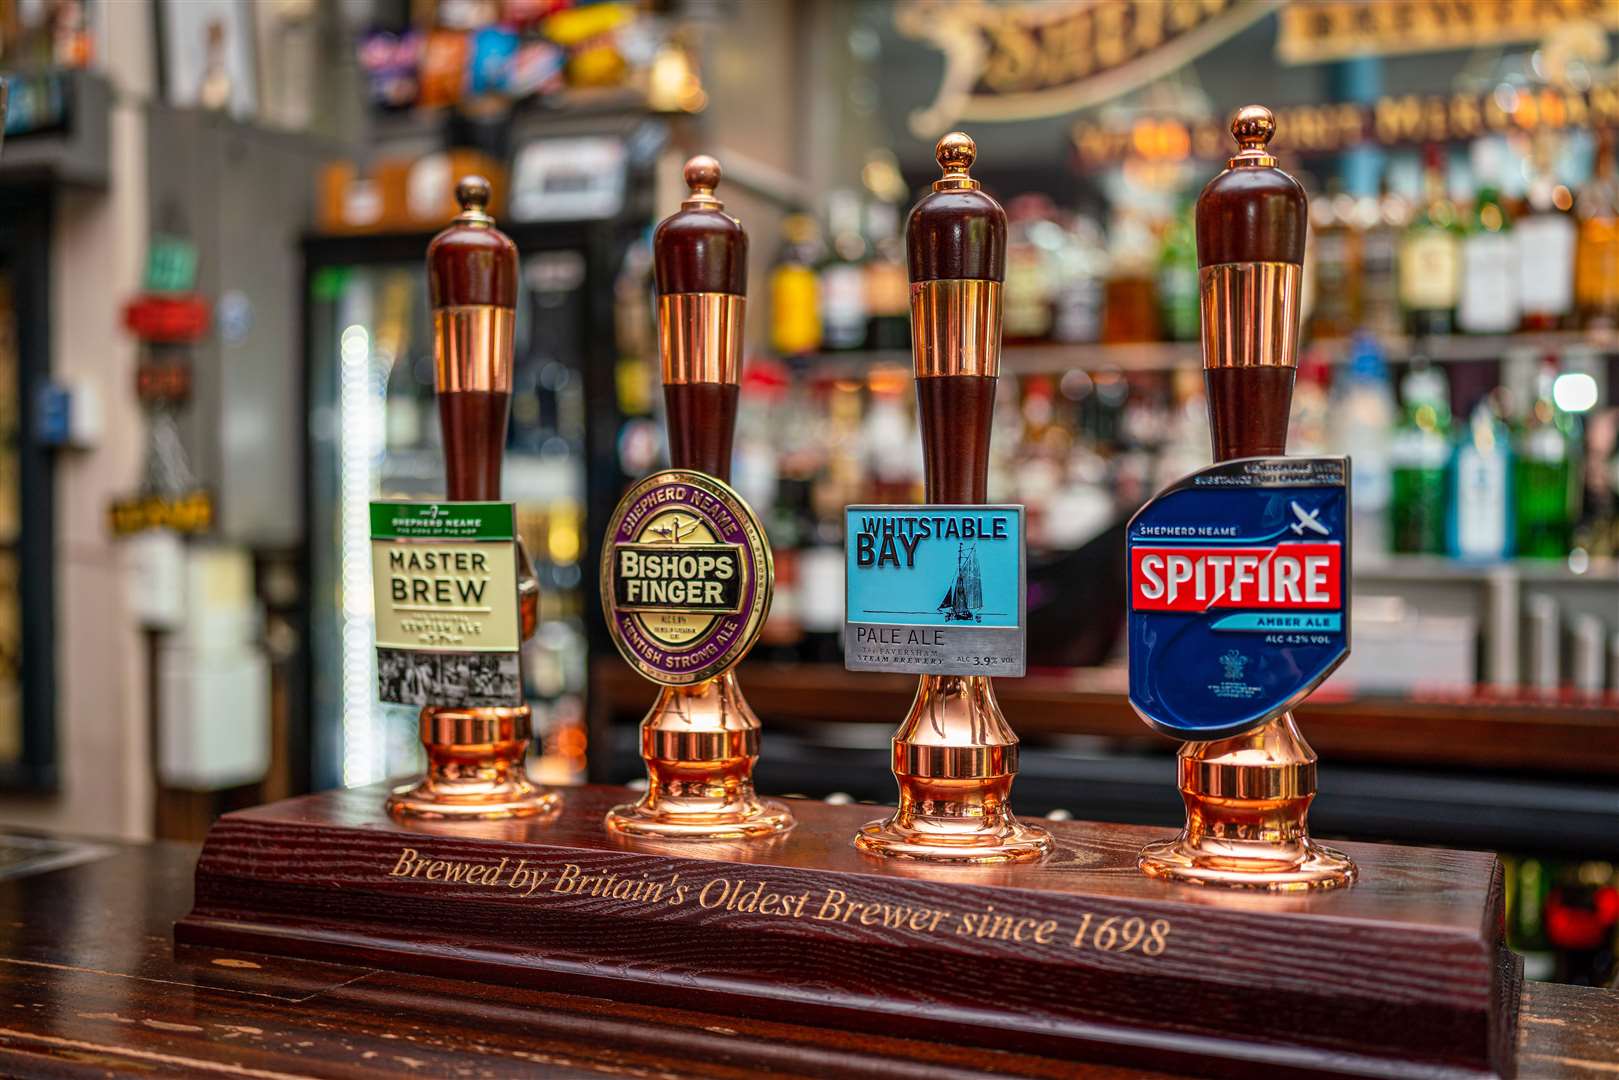 Revenues, profits and shareholder dividends are on the up. Picture: Shepherd Neame/Frankie Julian